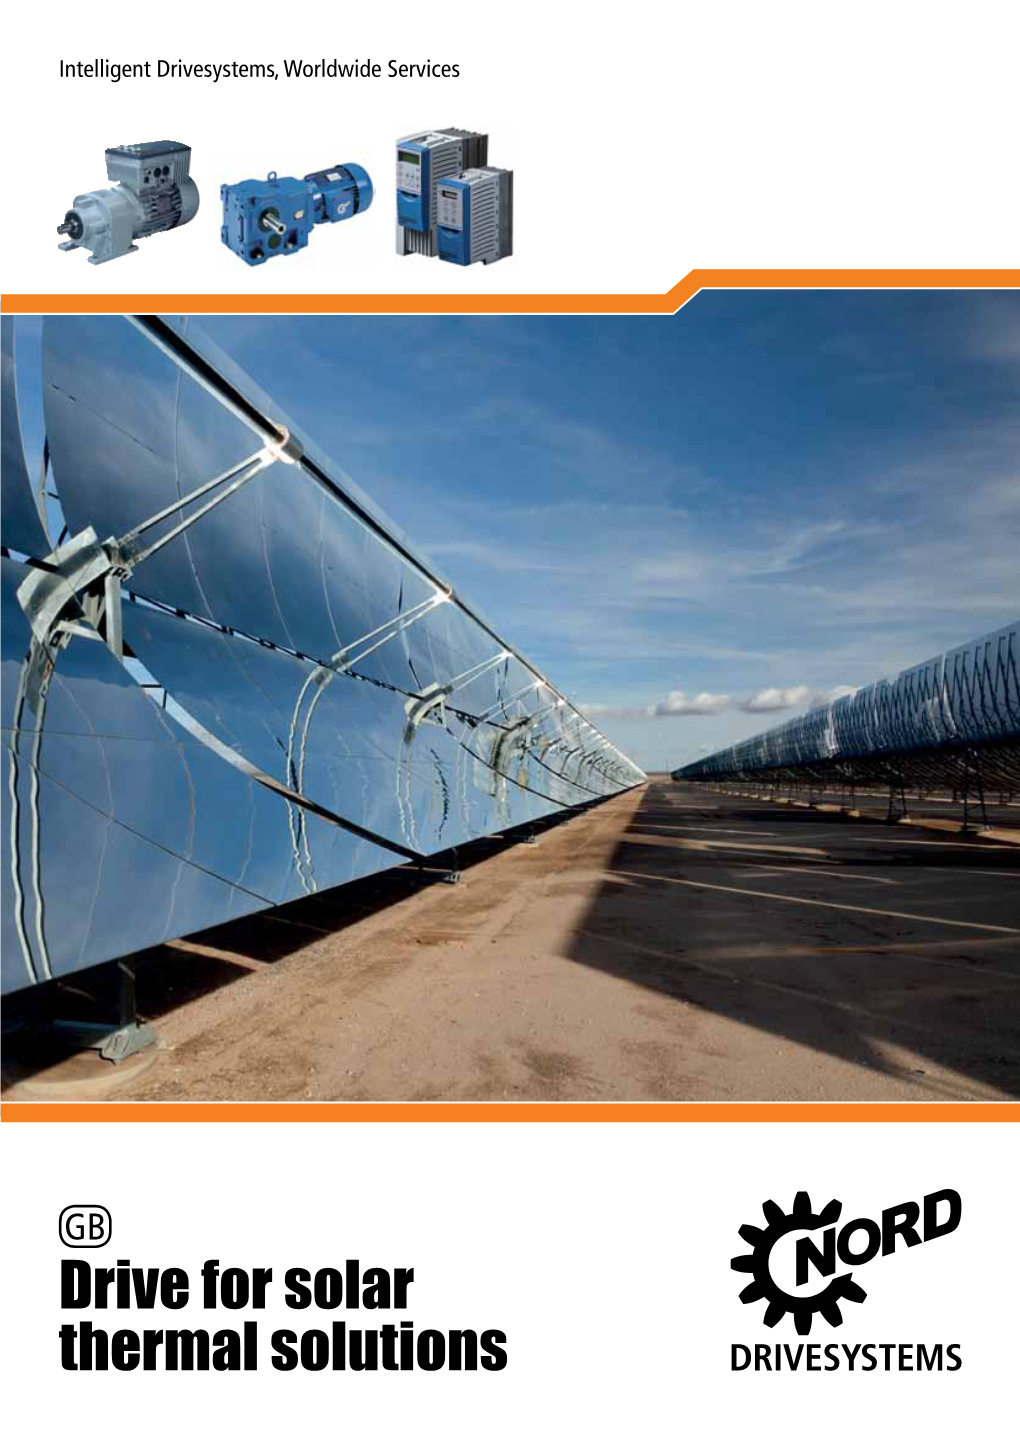 Drive for Solar Thermal Solutions DRIVESYSTEMS NORD Drivesystems | Intelligent Drivesystems, Worldwide Services